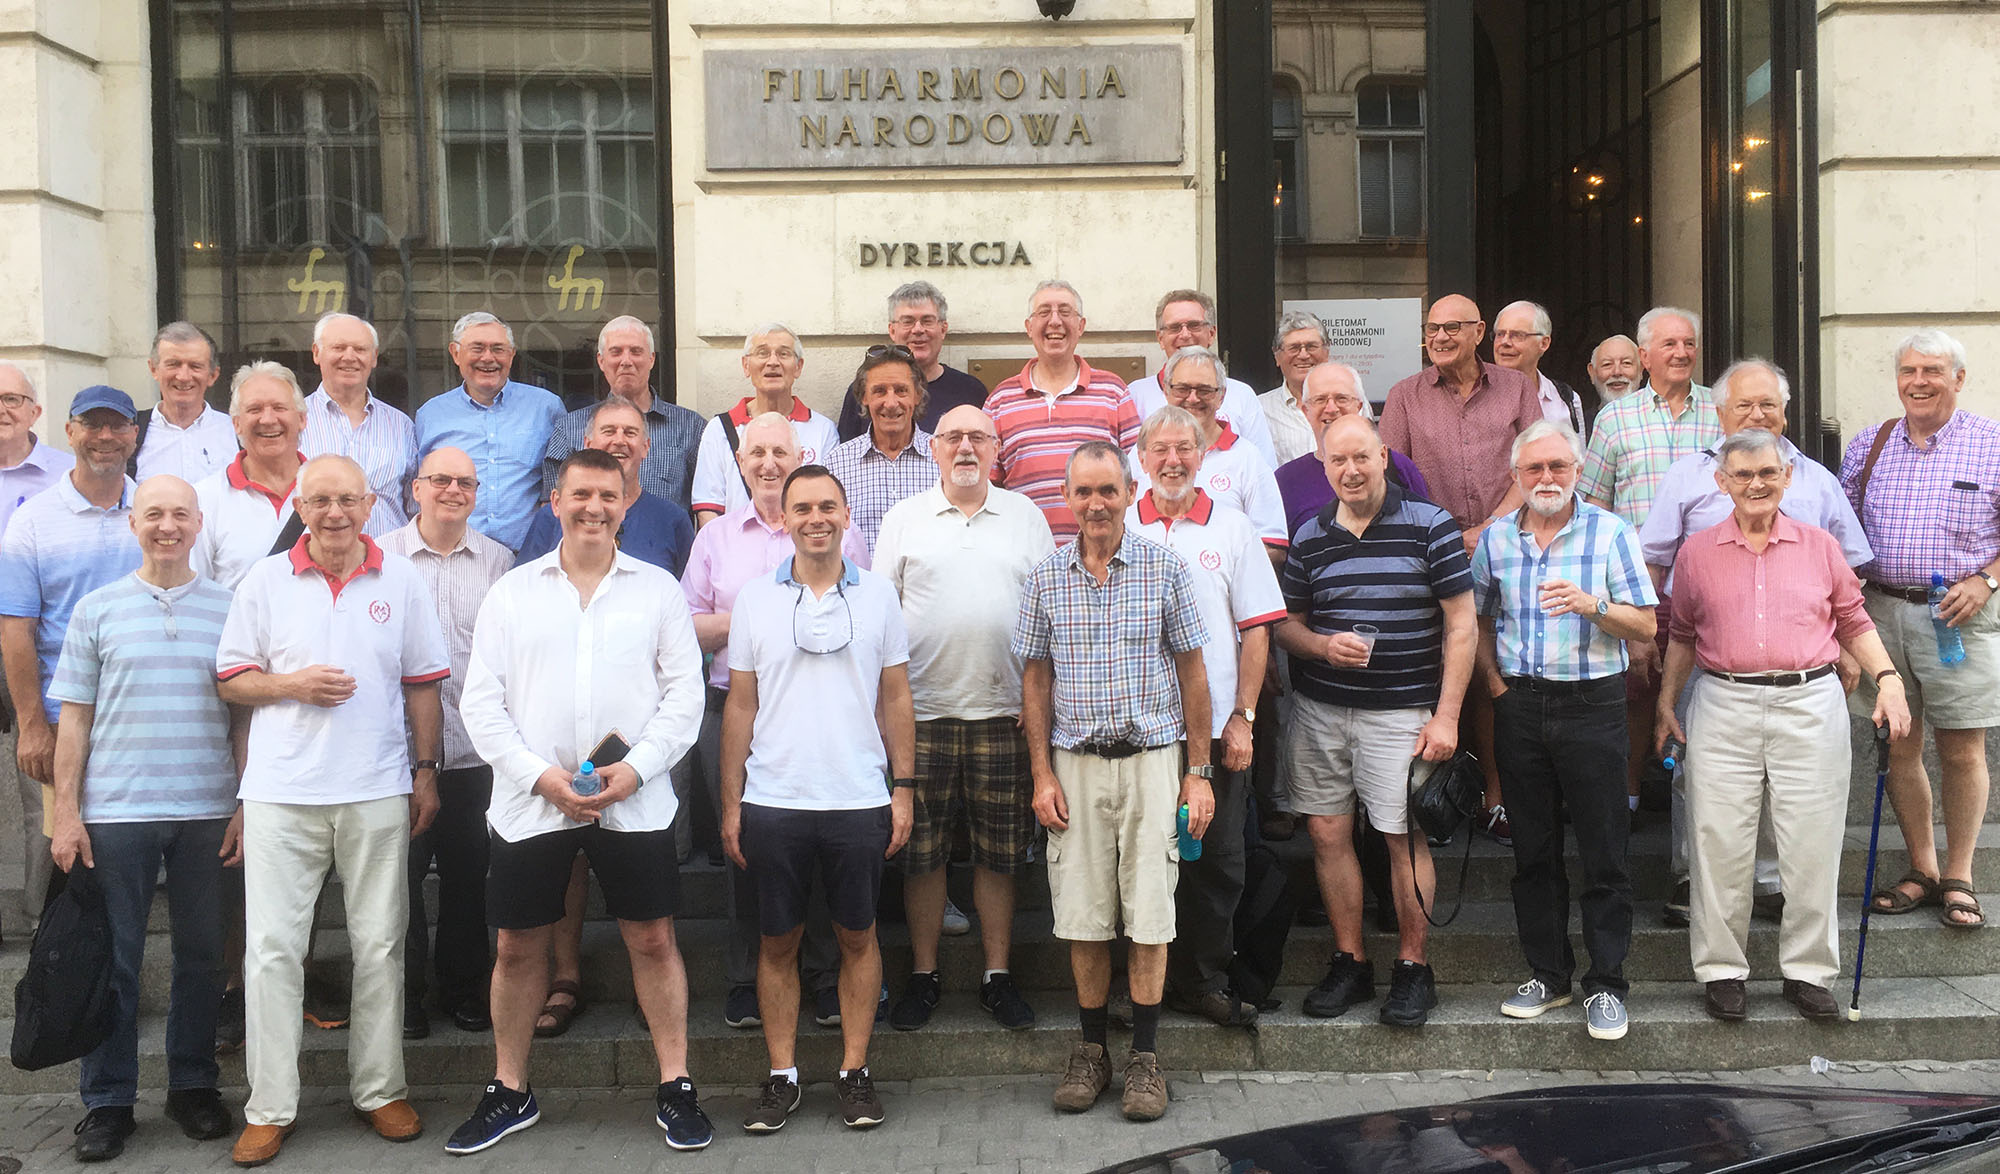 Reading Male Voice Choir relax outside the National Philharmonia, Warsaw, Poland